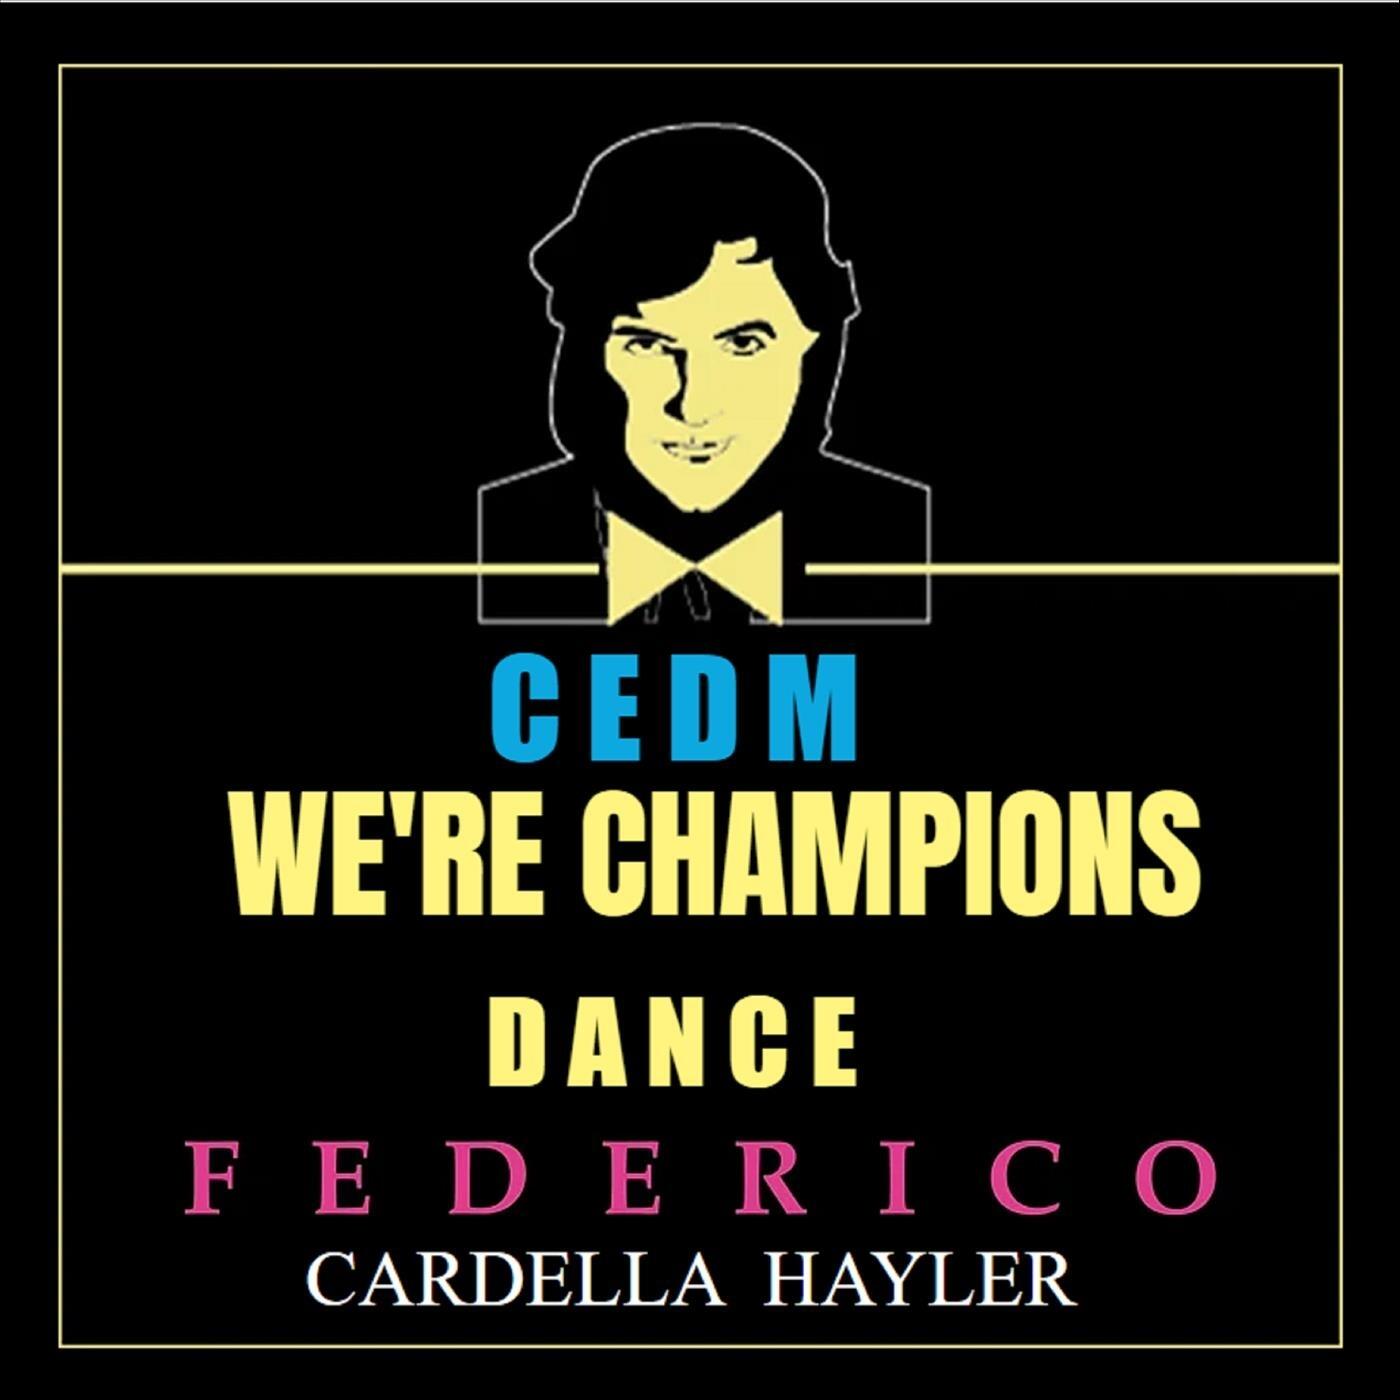 Stream Free Music from Albums by Federico Cardella Hayler | iHeart